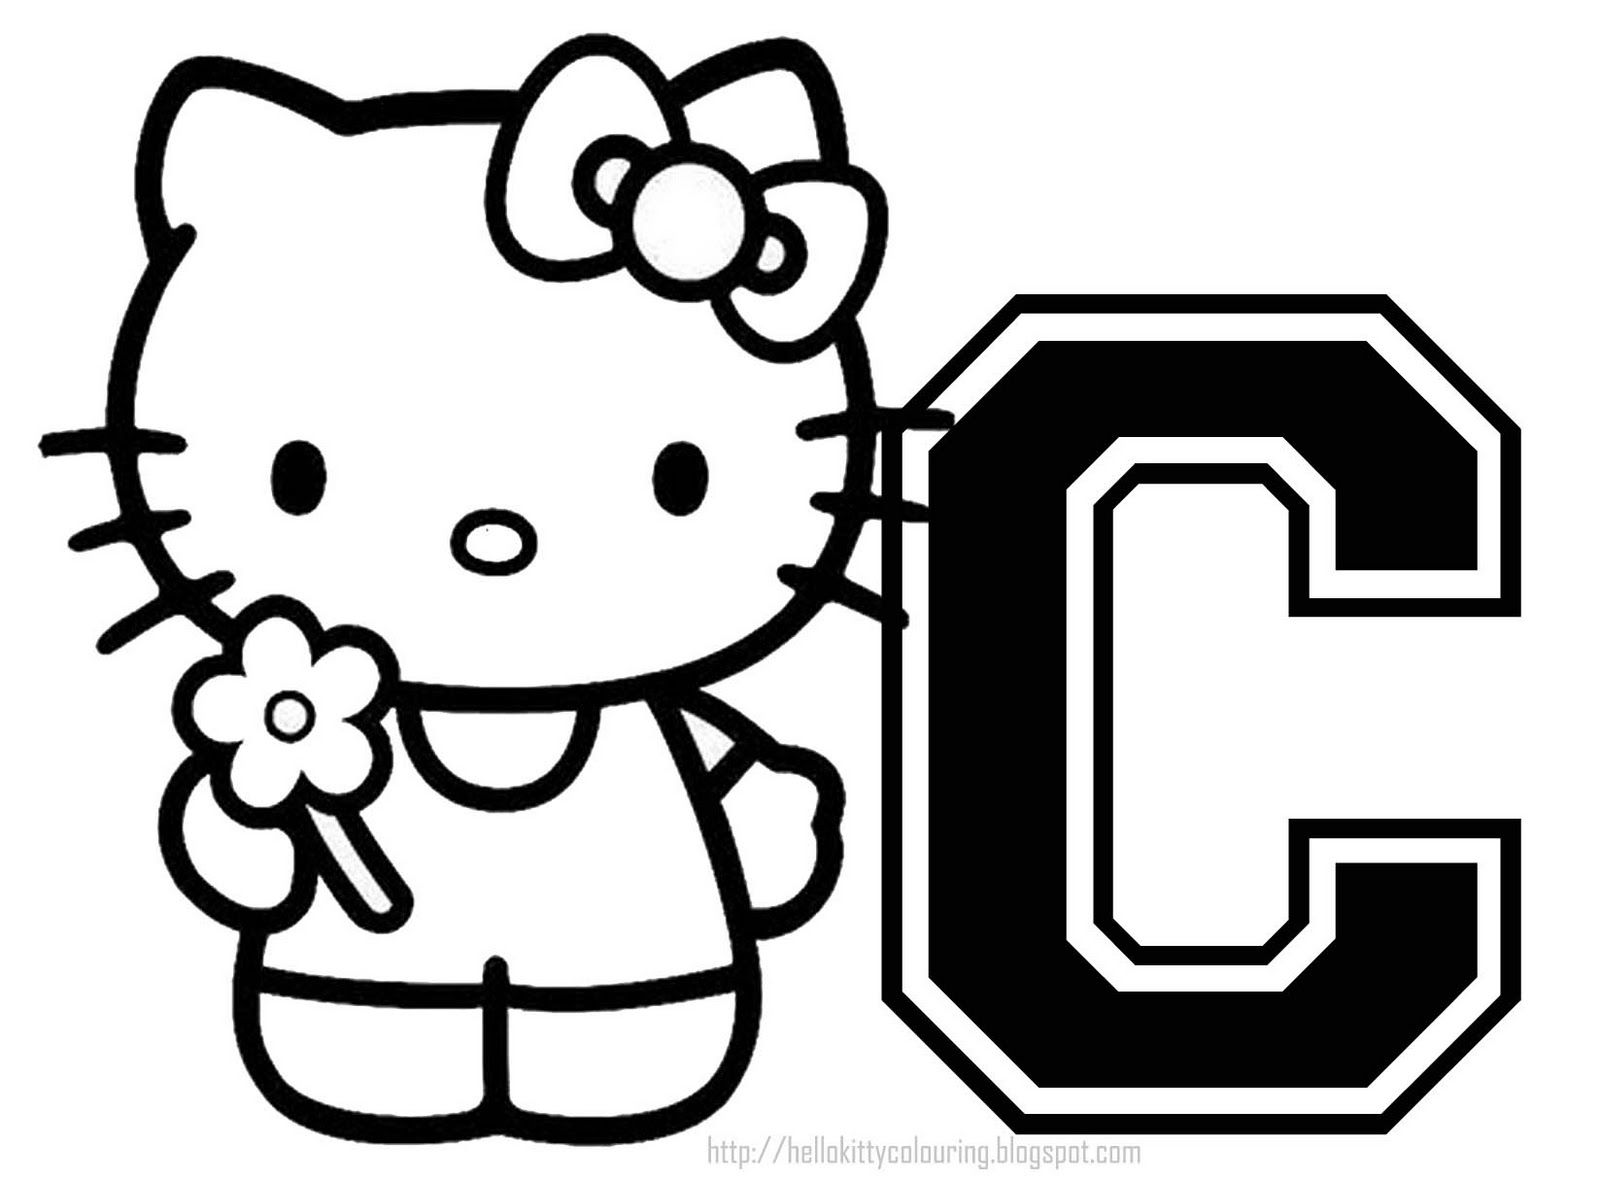 Hello Kitty Halloween Coloring Page - Coloring Home